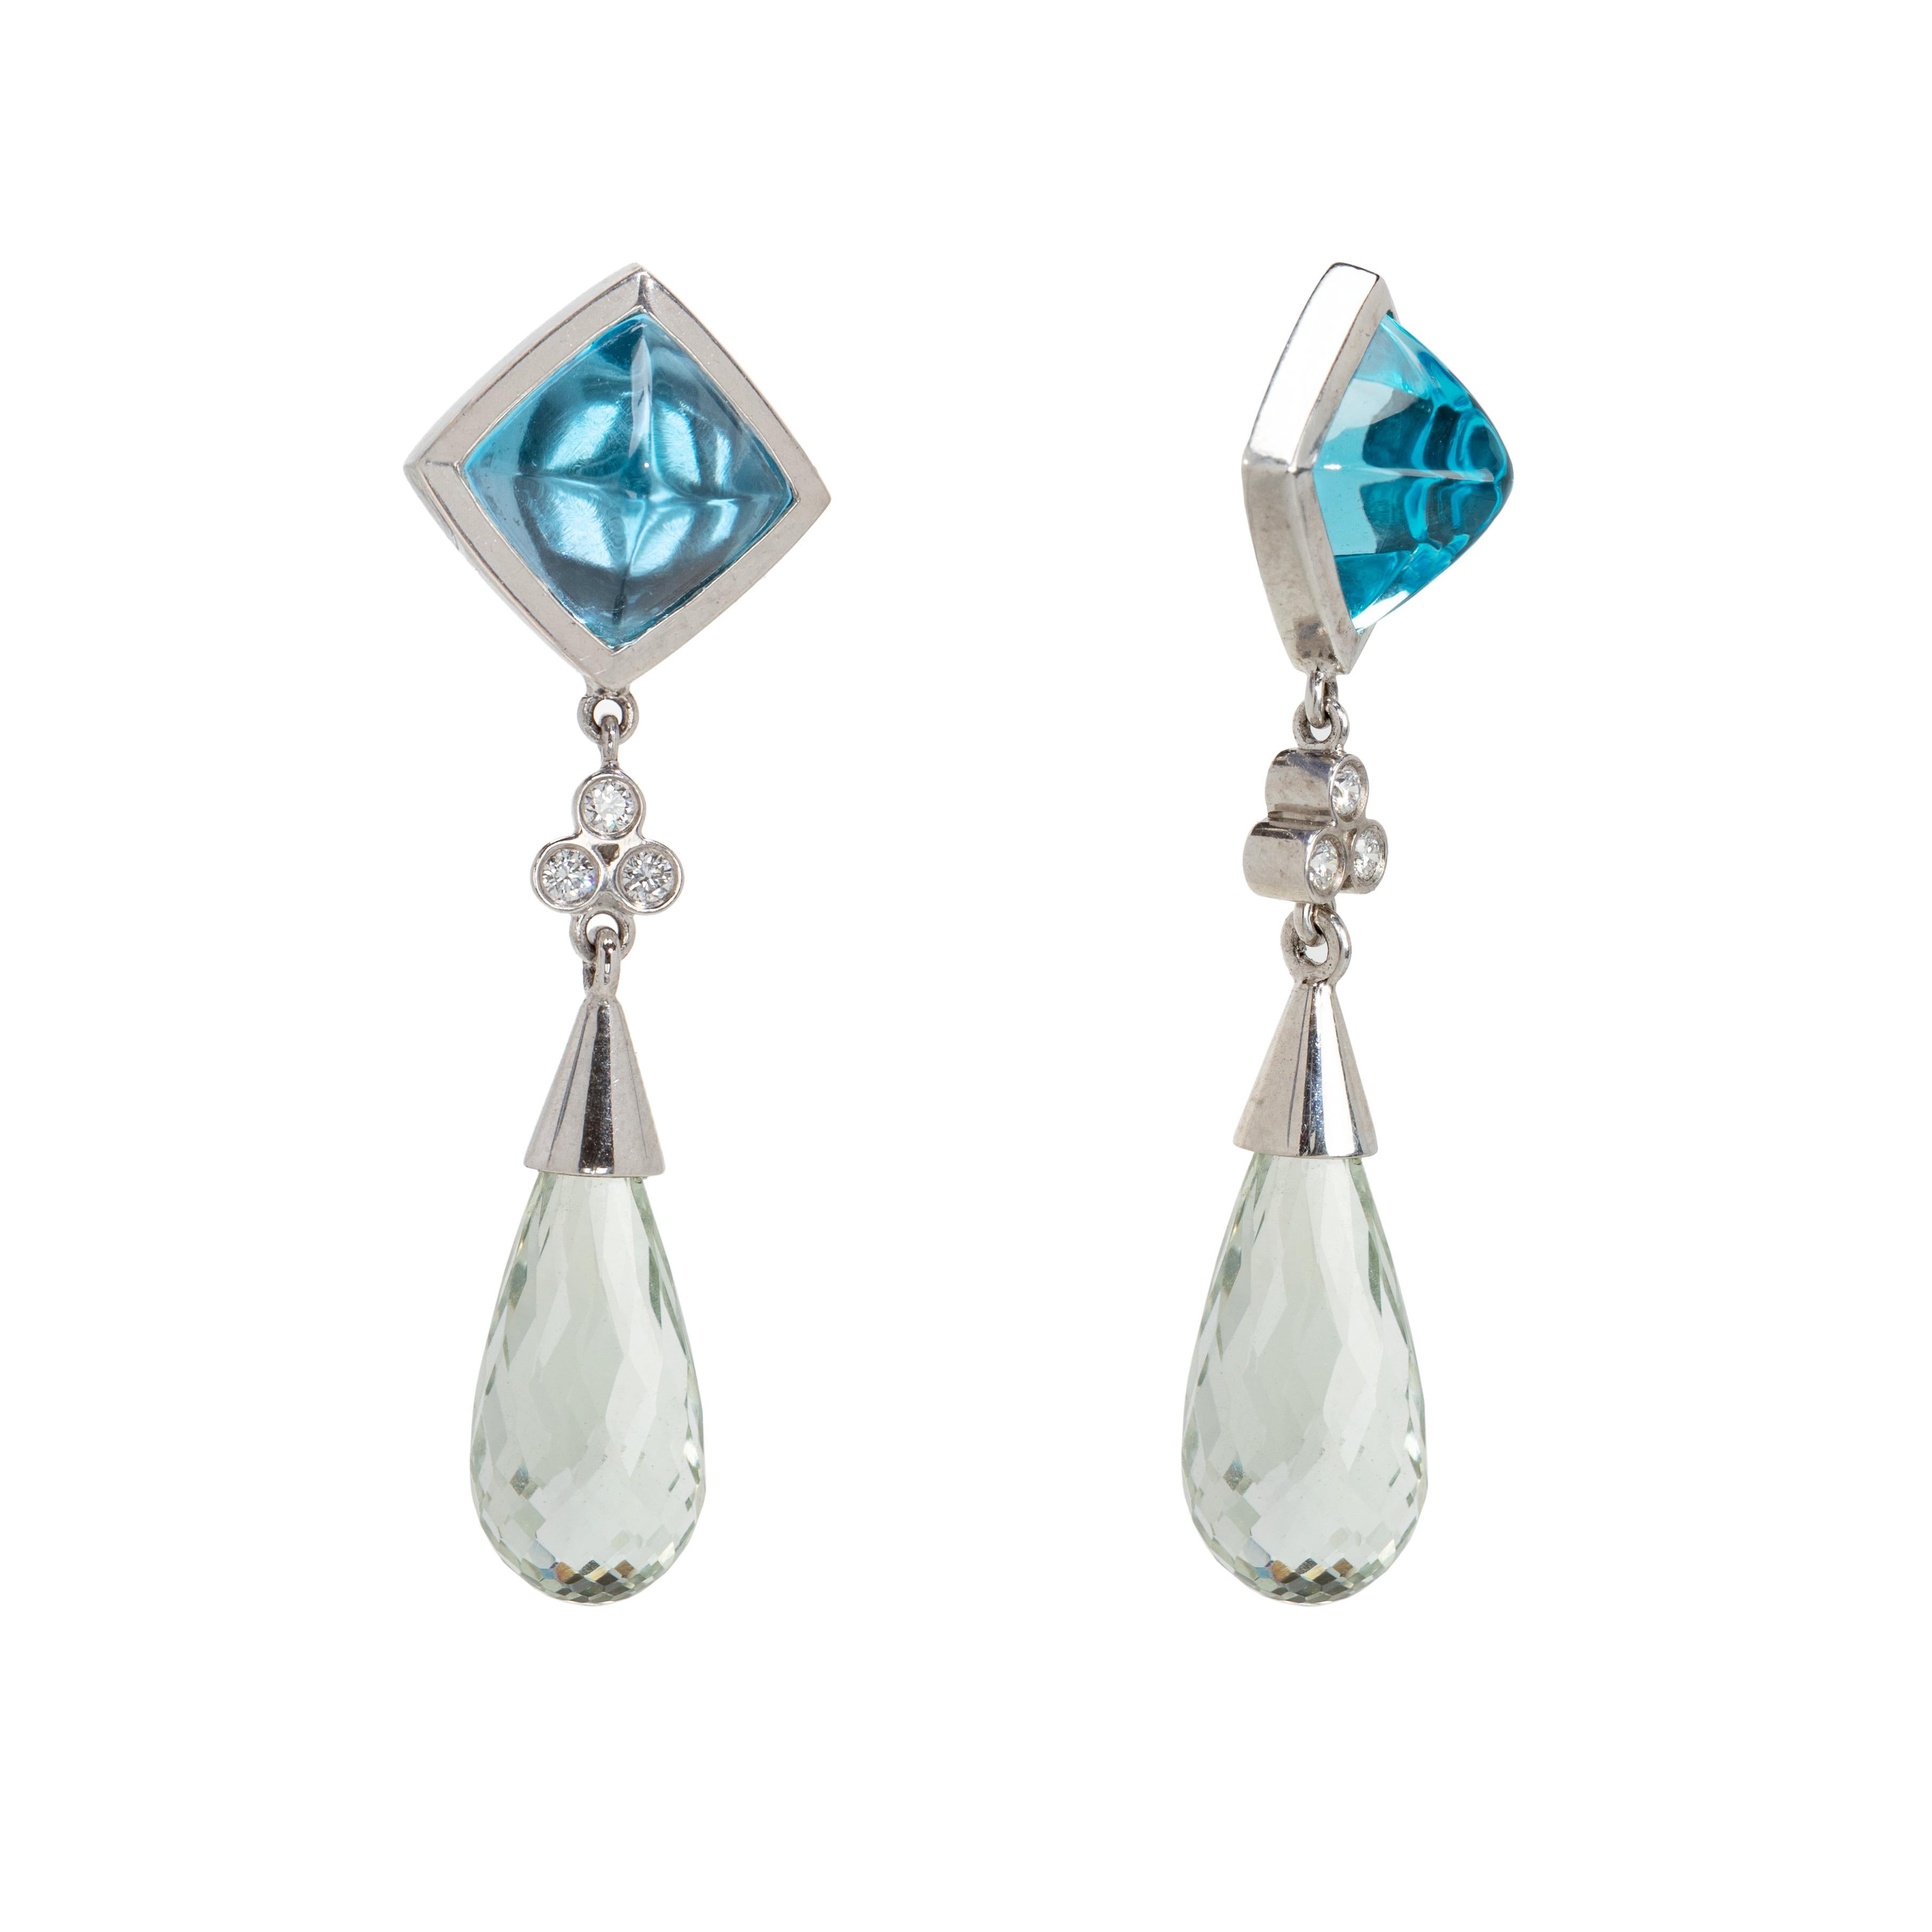 These “icy-cool” earrings are a fresh piece of statement jewelry that will never go unnoticed. The crystal clear blue topaz, set in palladium, is enhanced by the sparkling diamond seated right below for a frosted appeal that is unparalleled. These